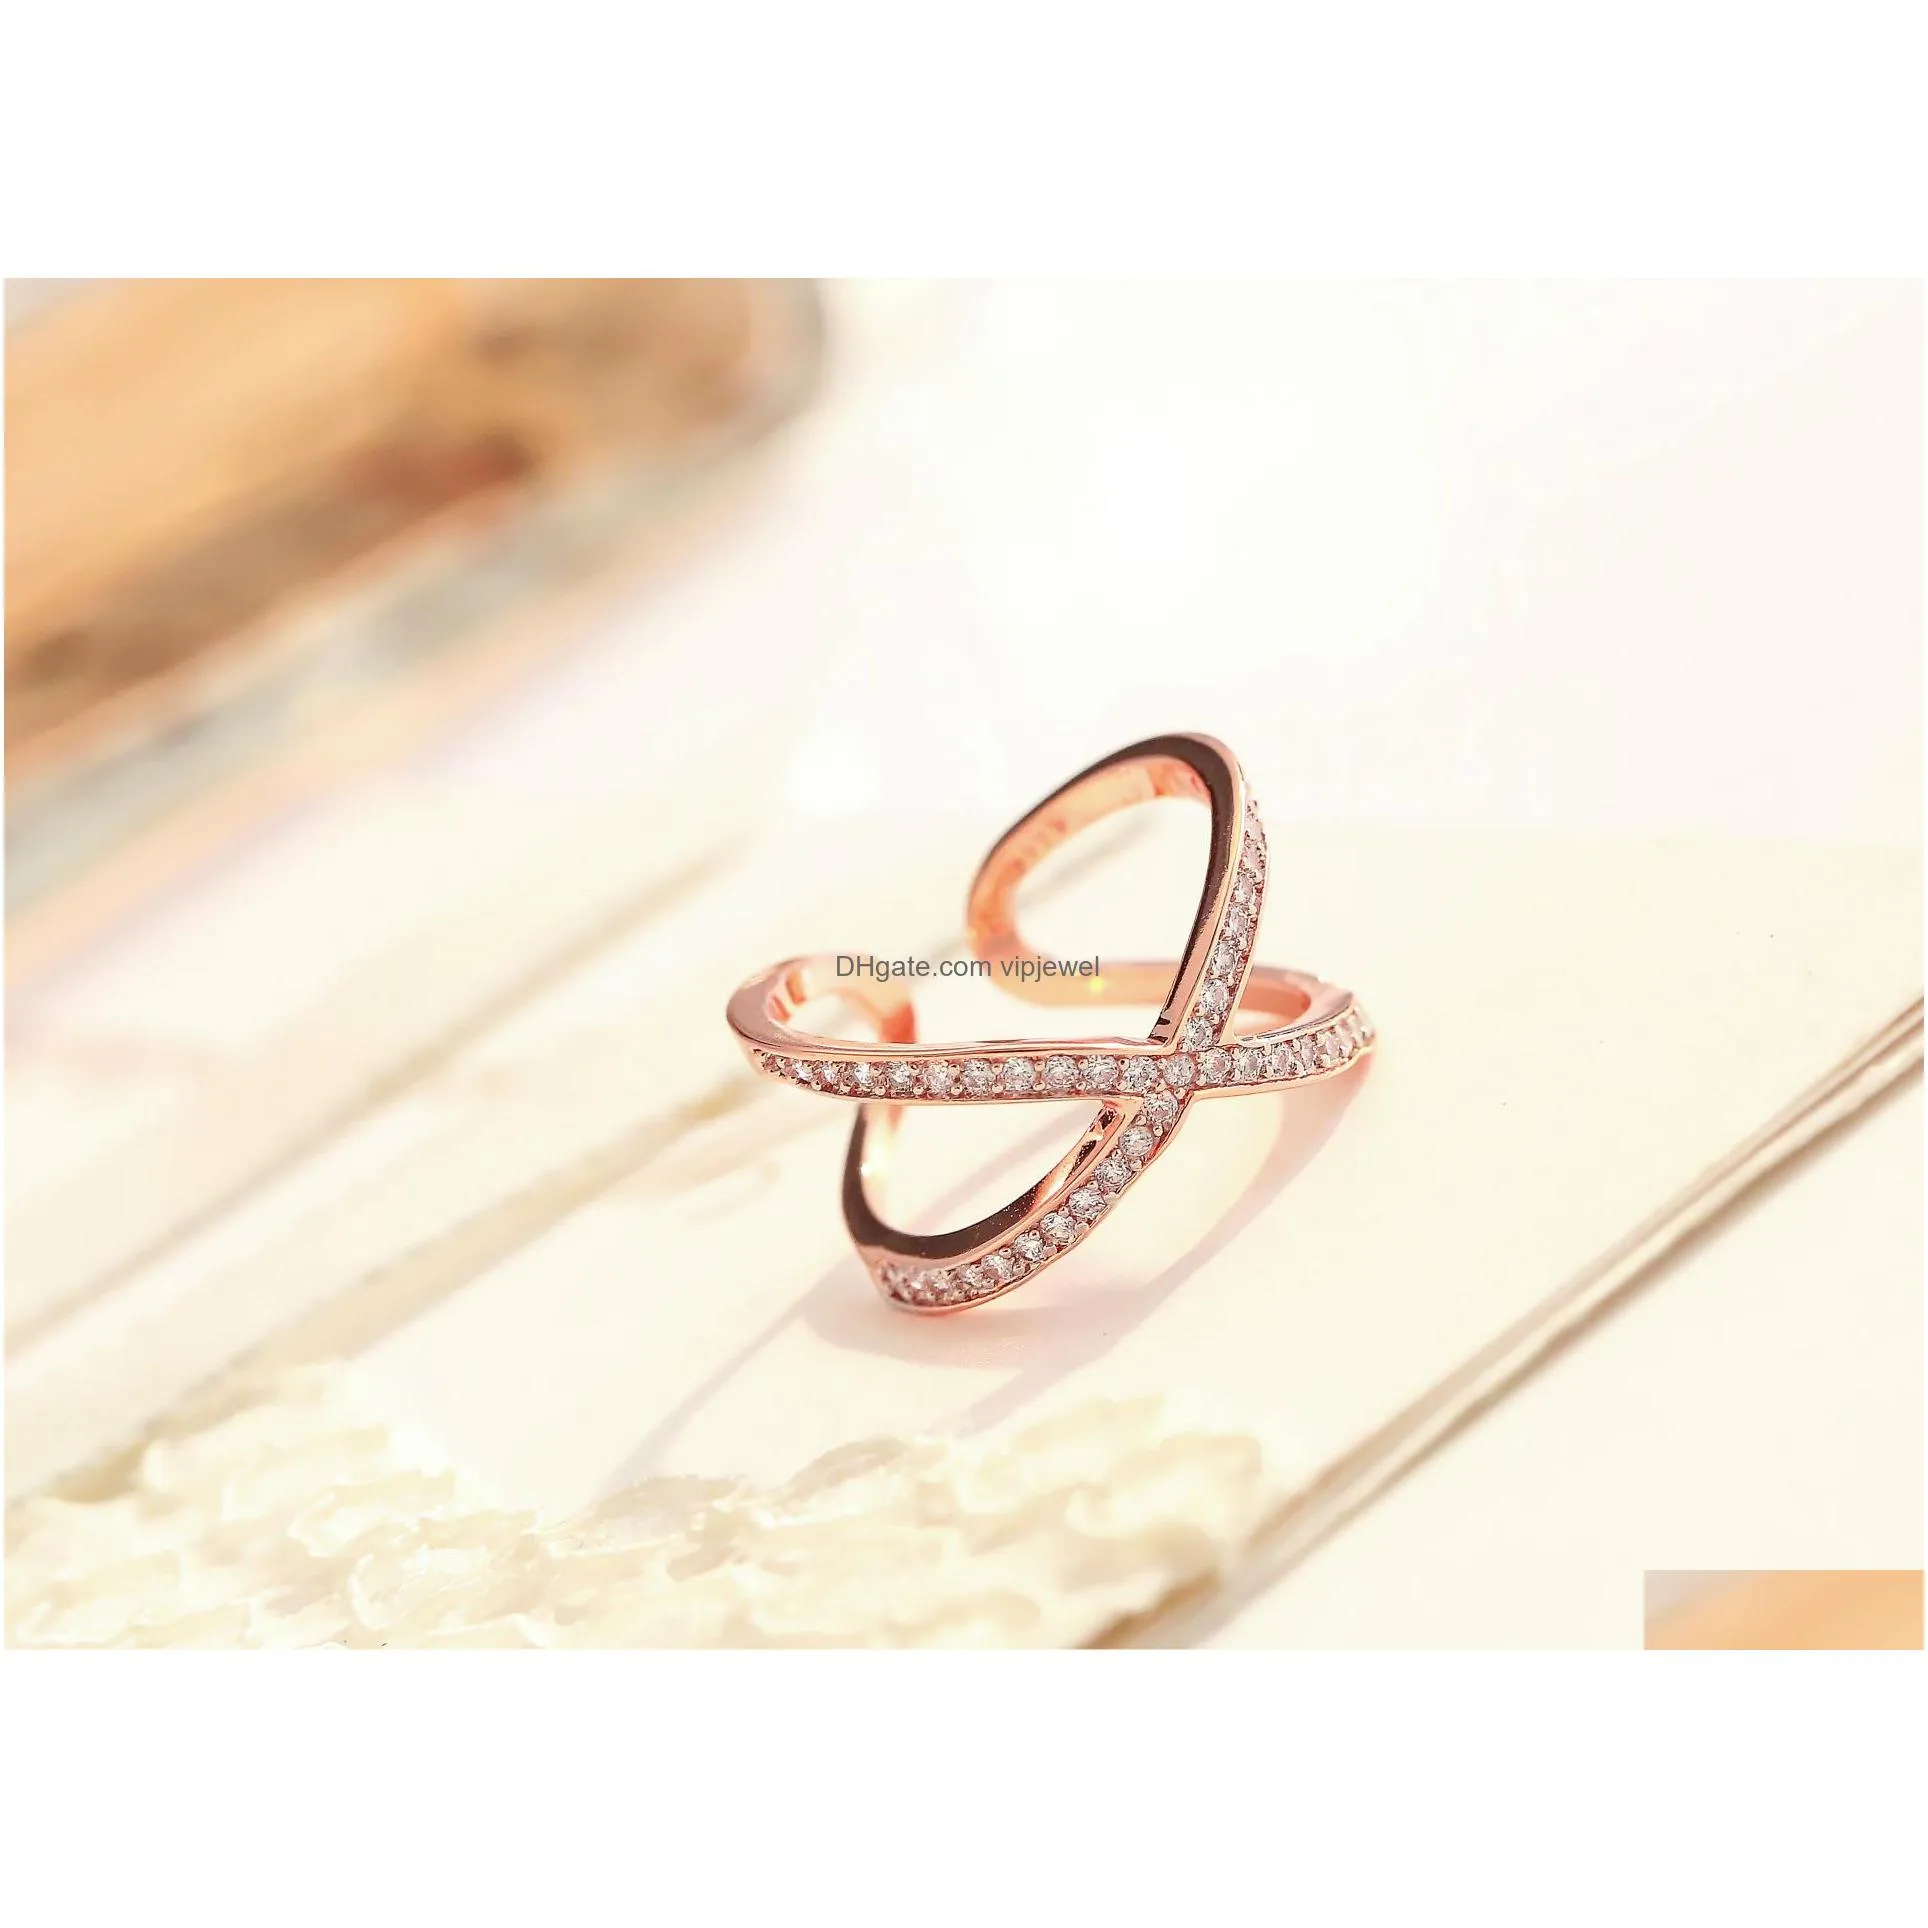  design x shape cross band rings for women fashion silver plated couple wedding micro paved cz crystal luxury jewelry